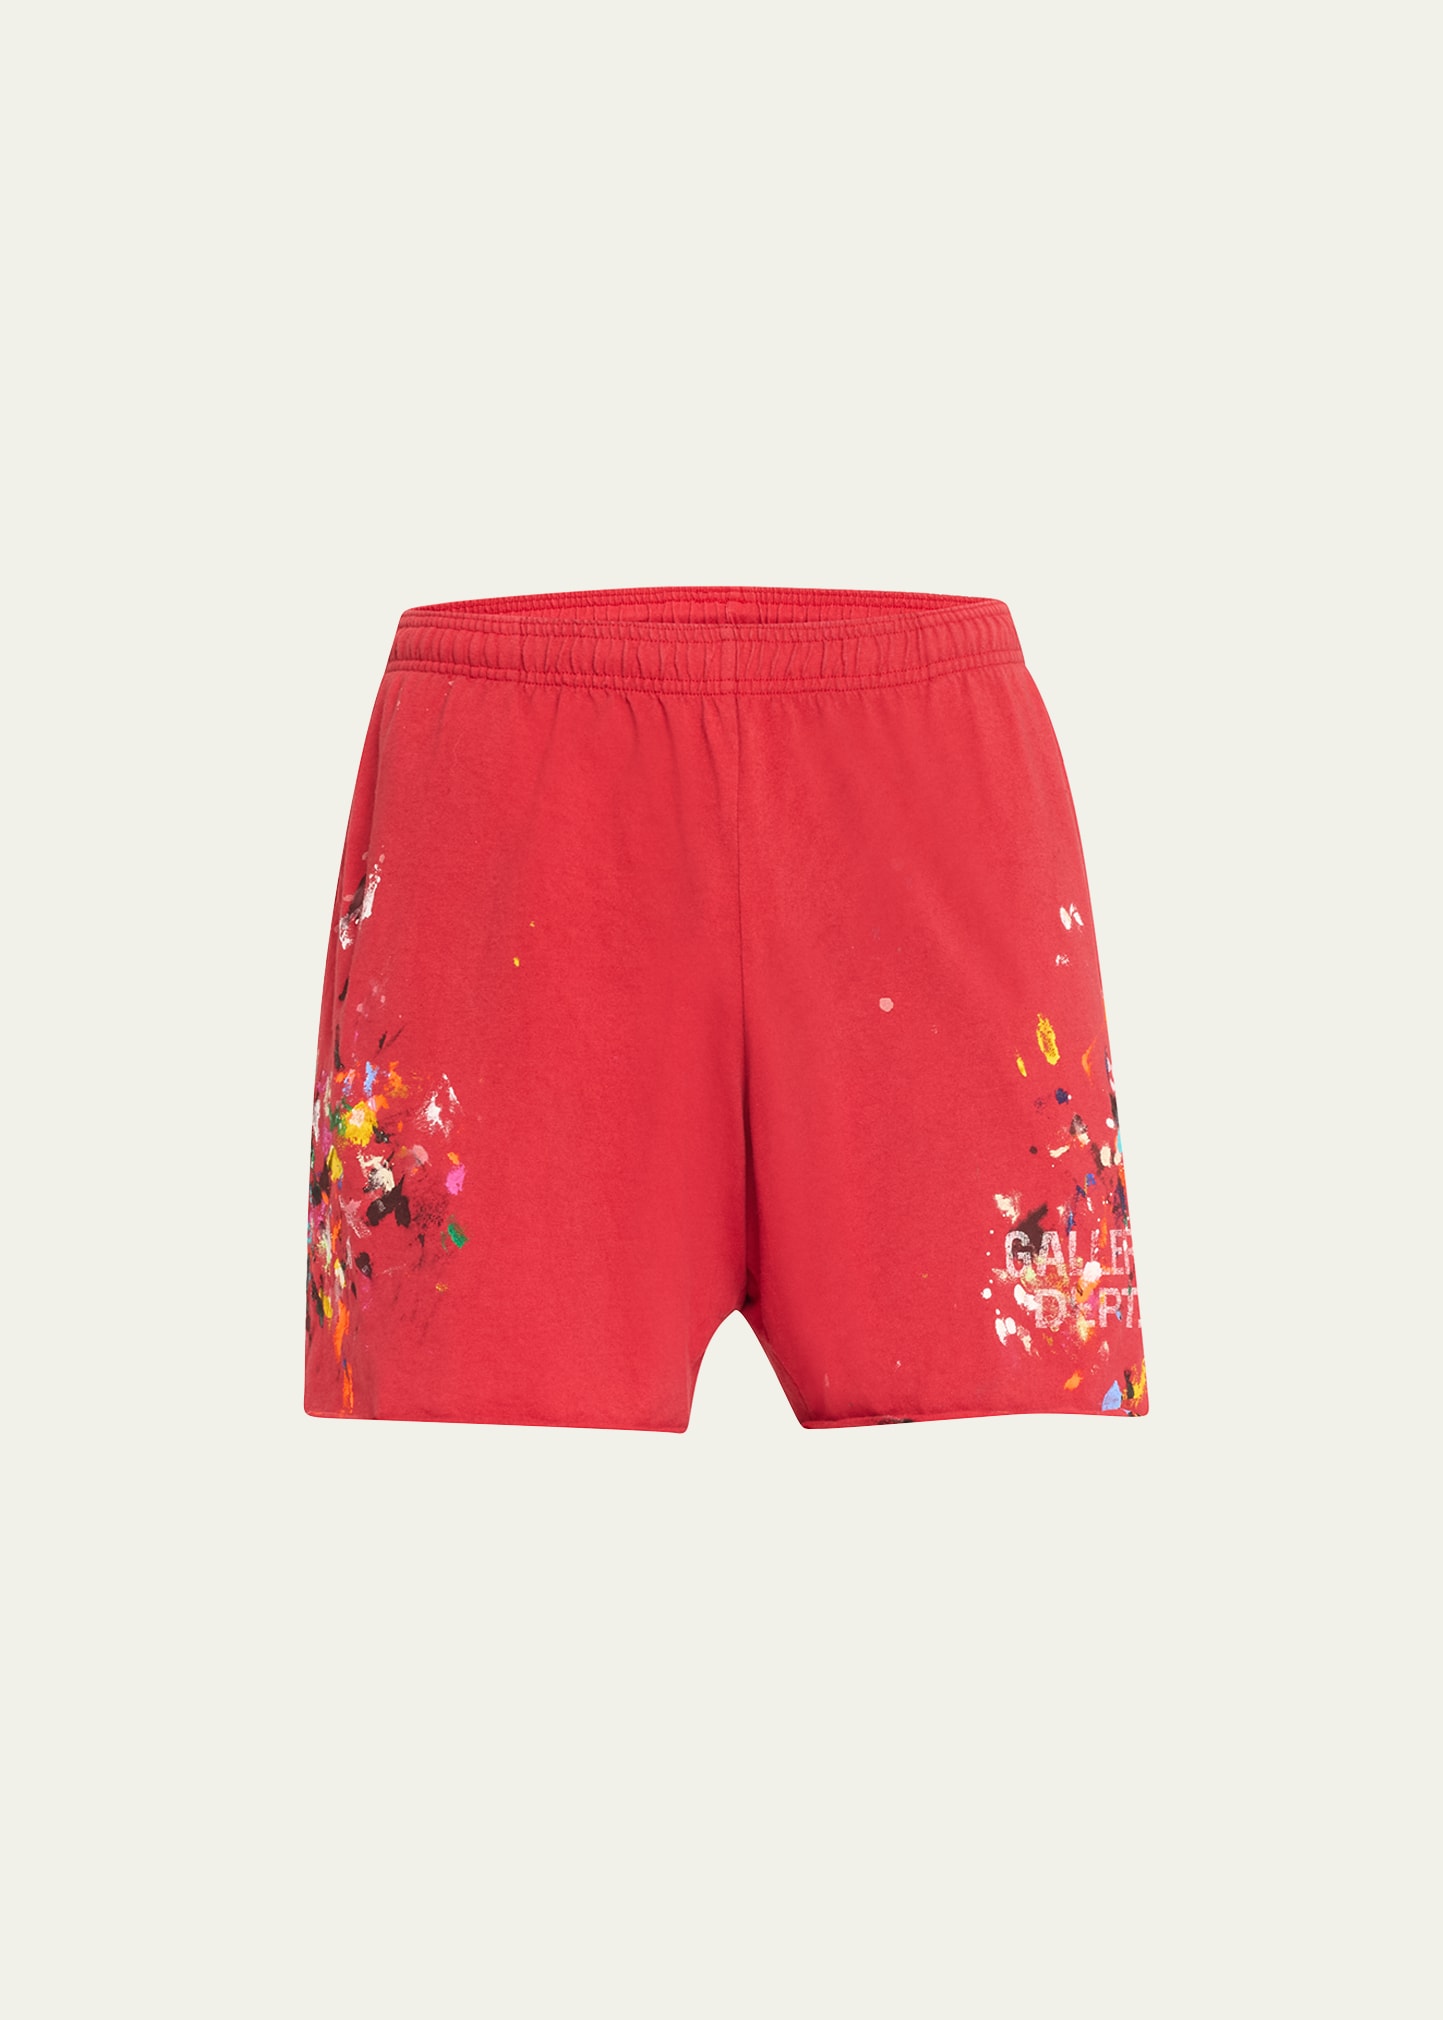 Gallery Department Men's Insomnia Painted Jersey Shorts In Red